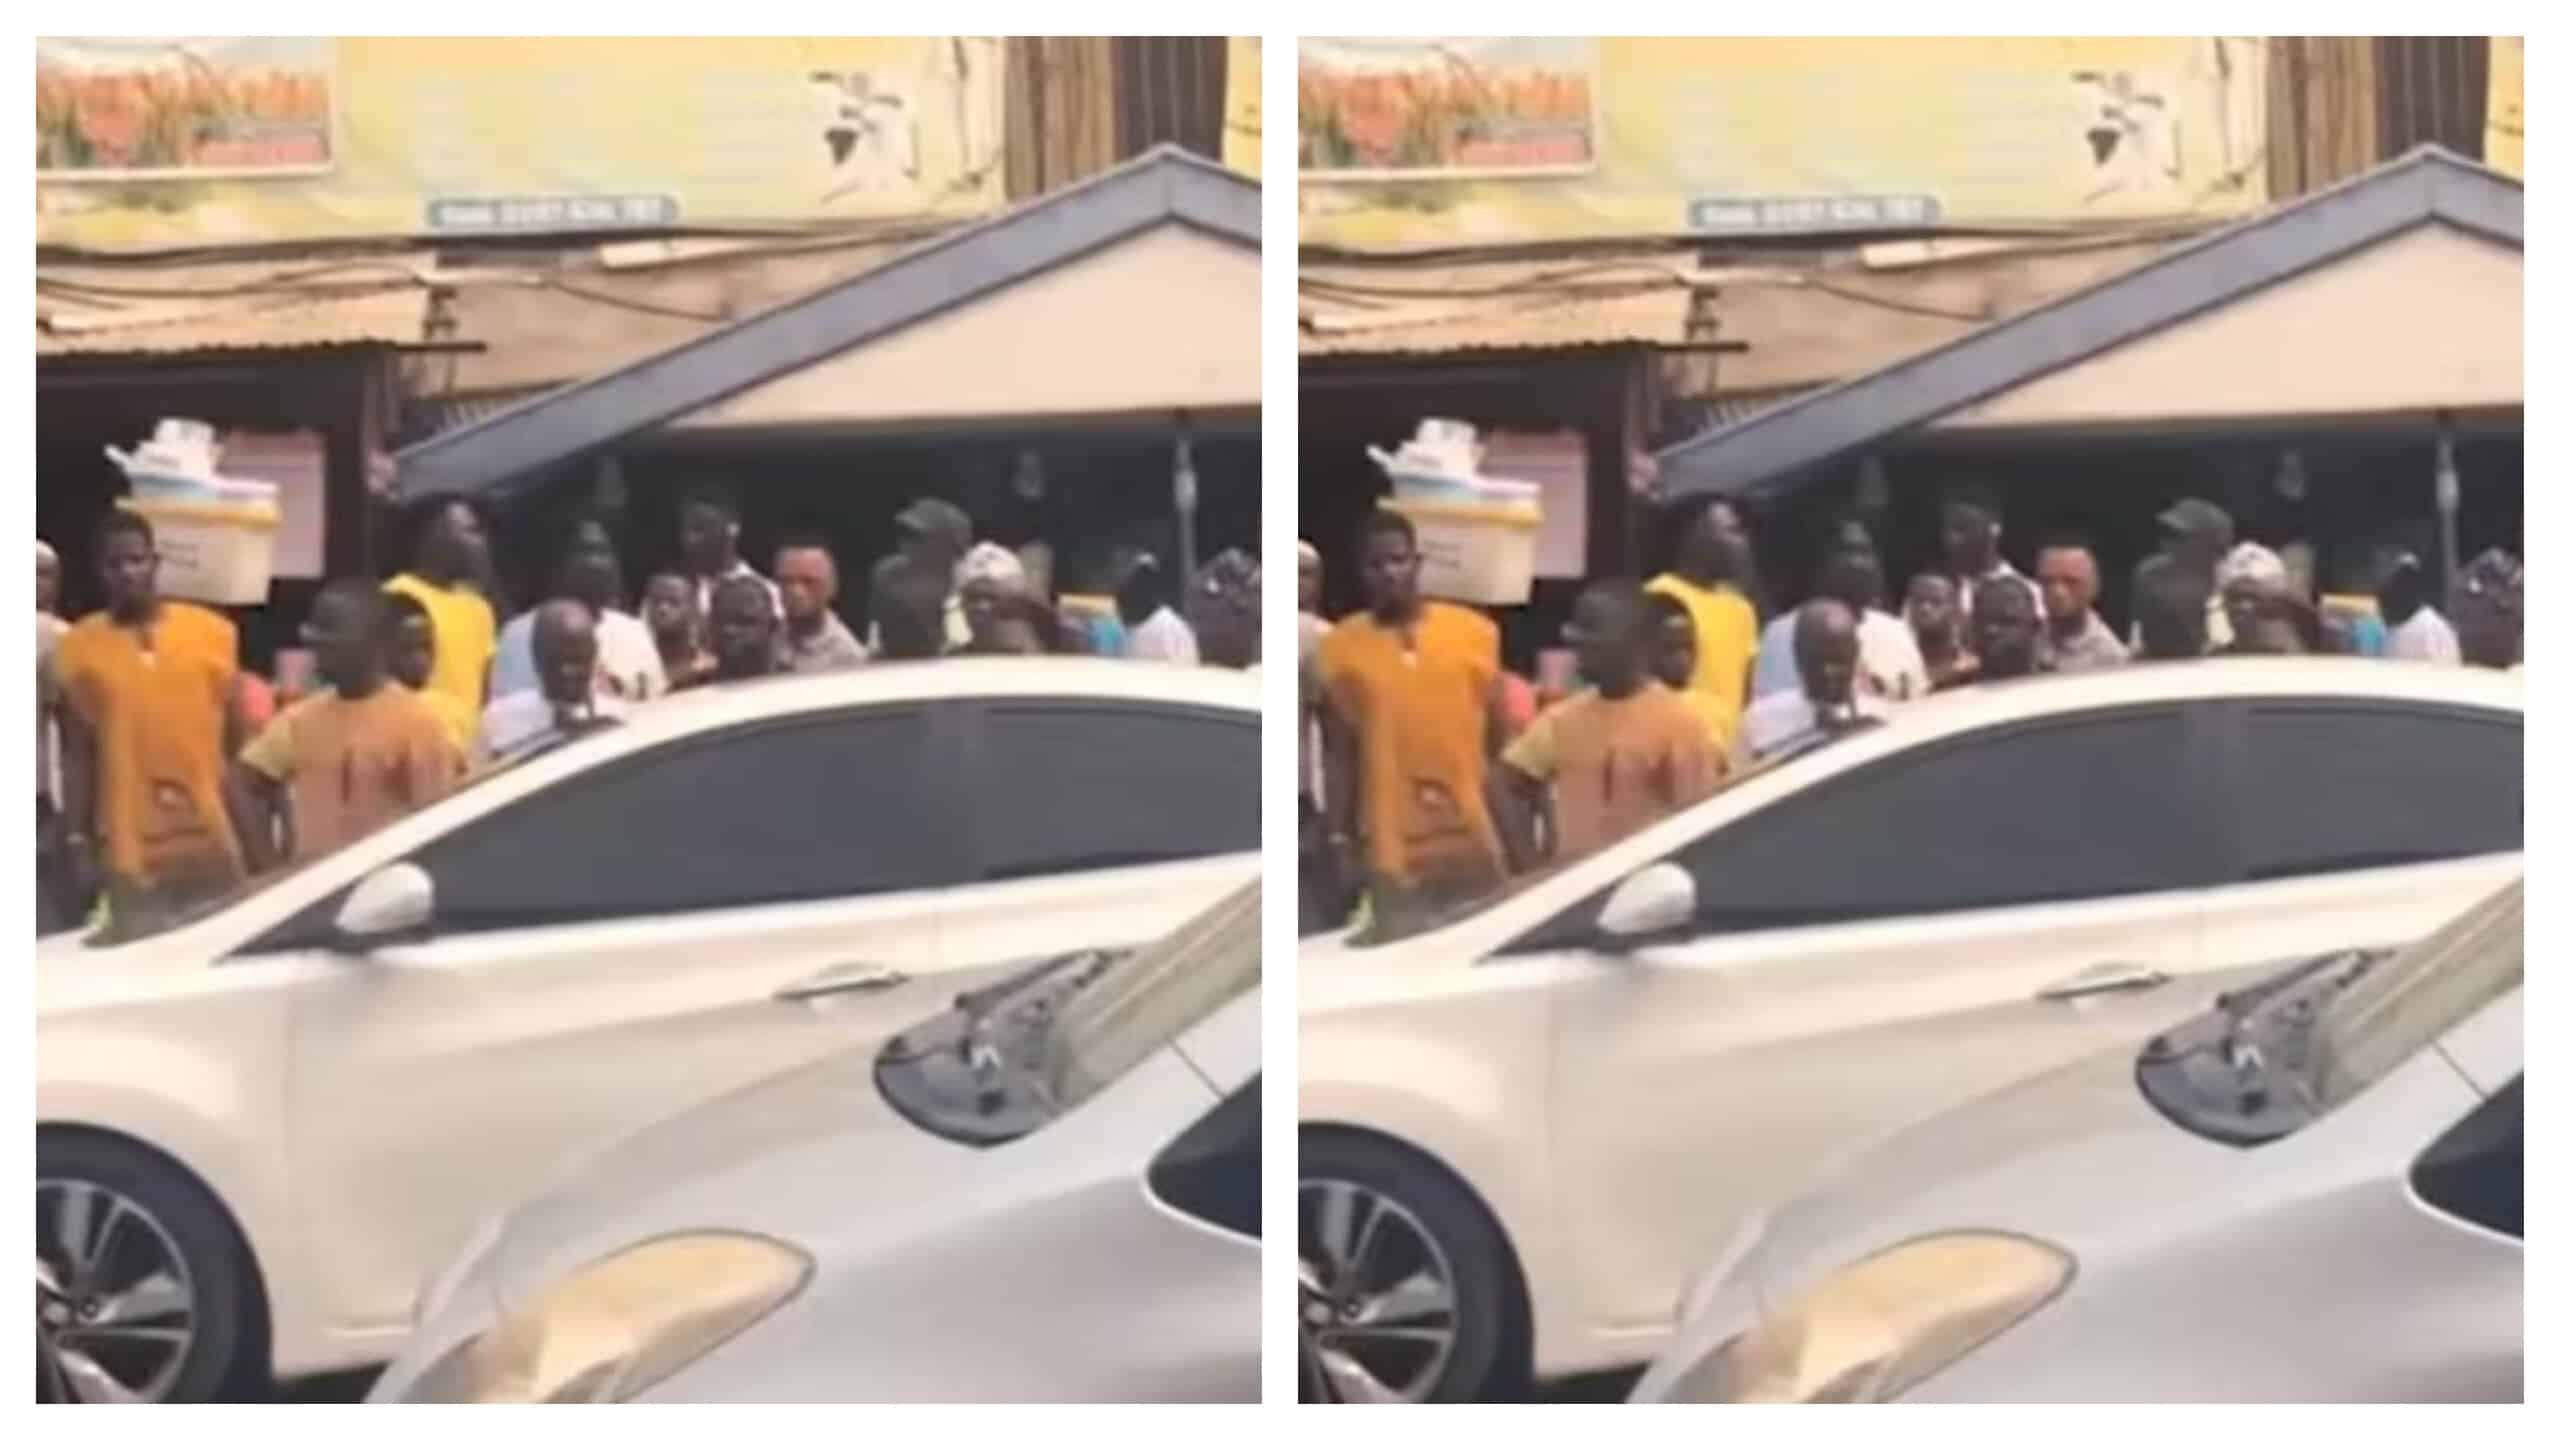 Sad! GH Man dies after going unconscious while driving a brand new car in Lapaz